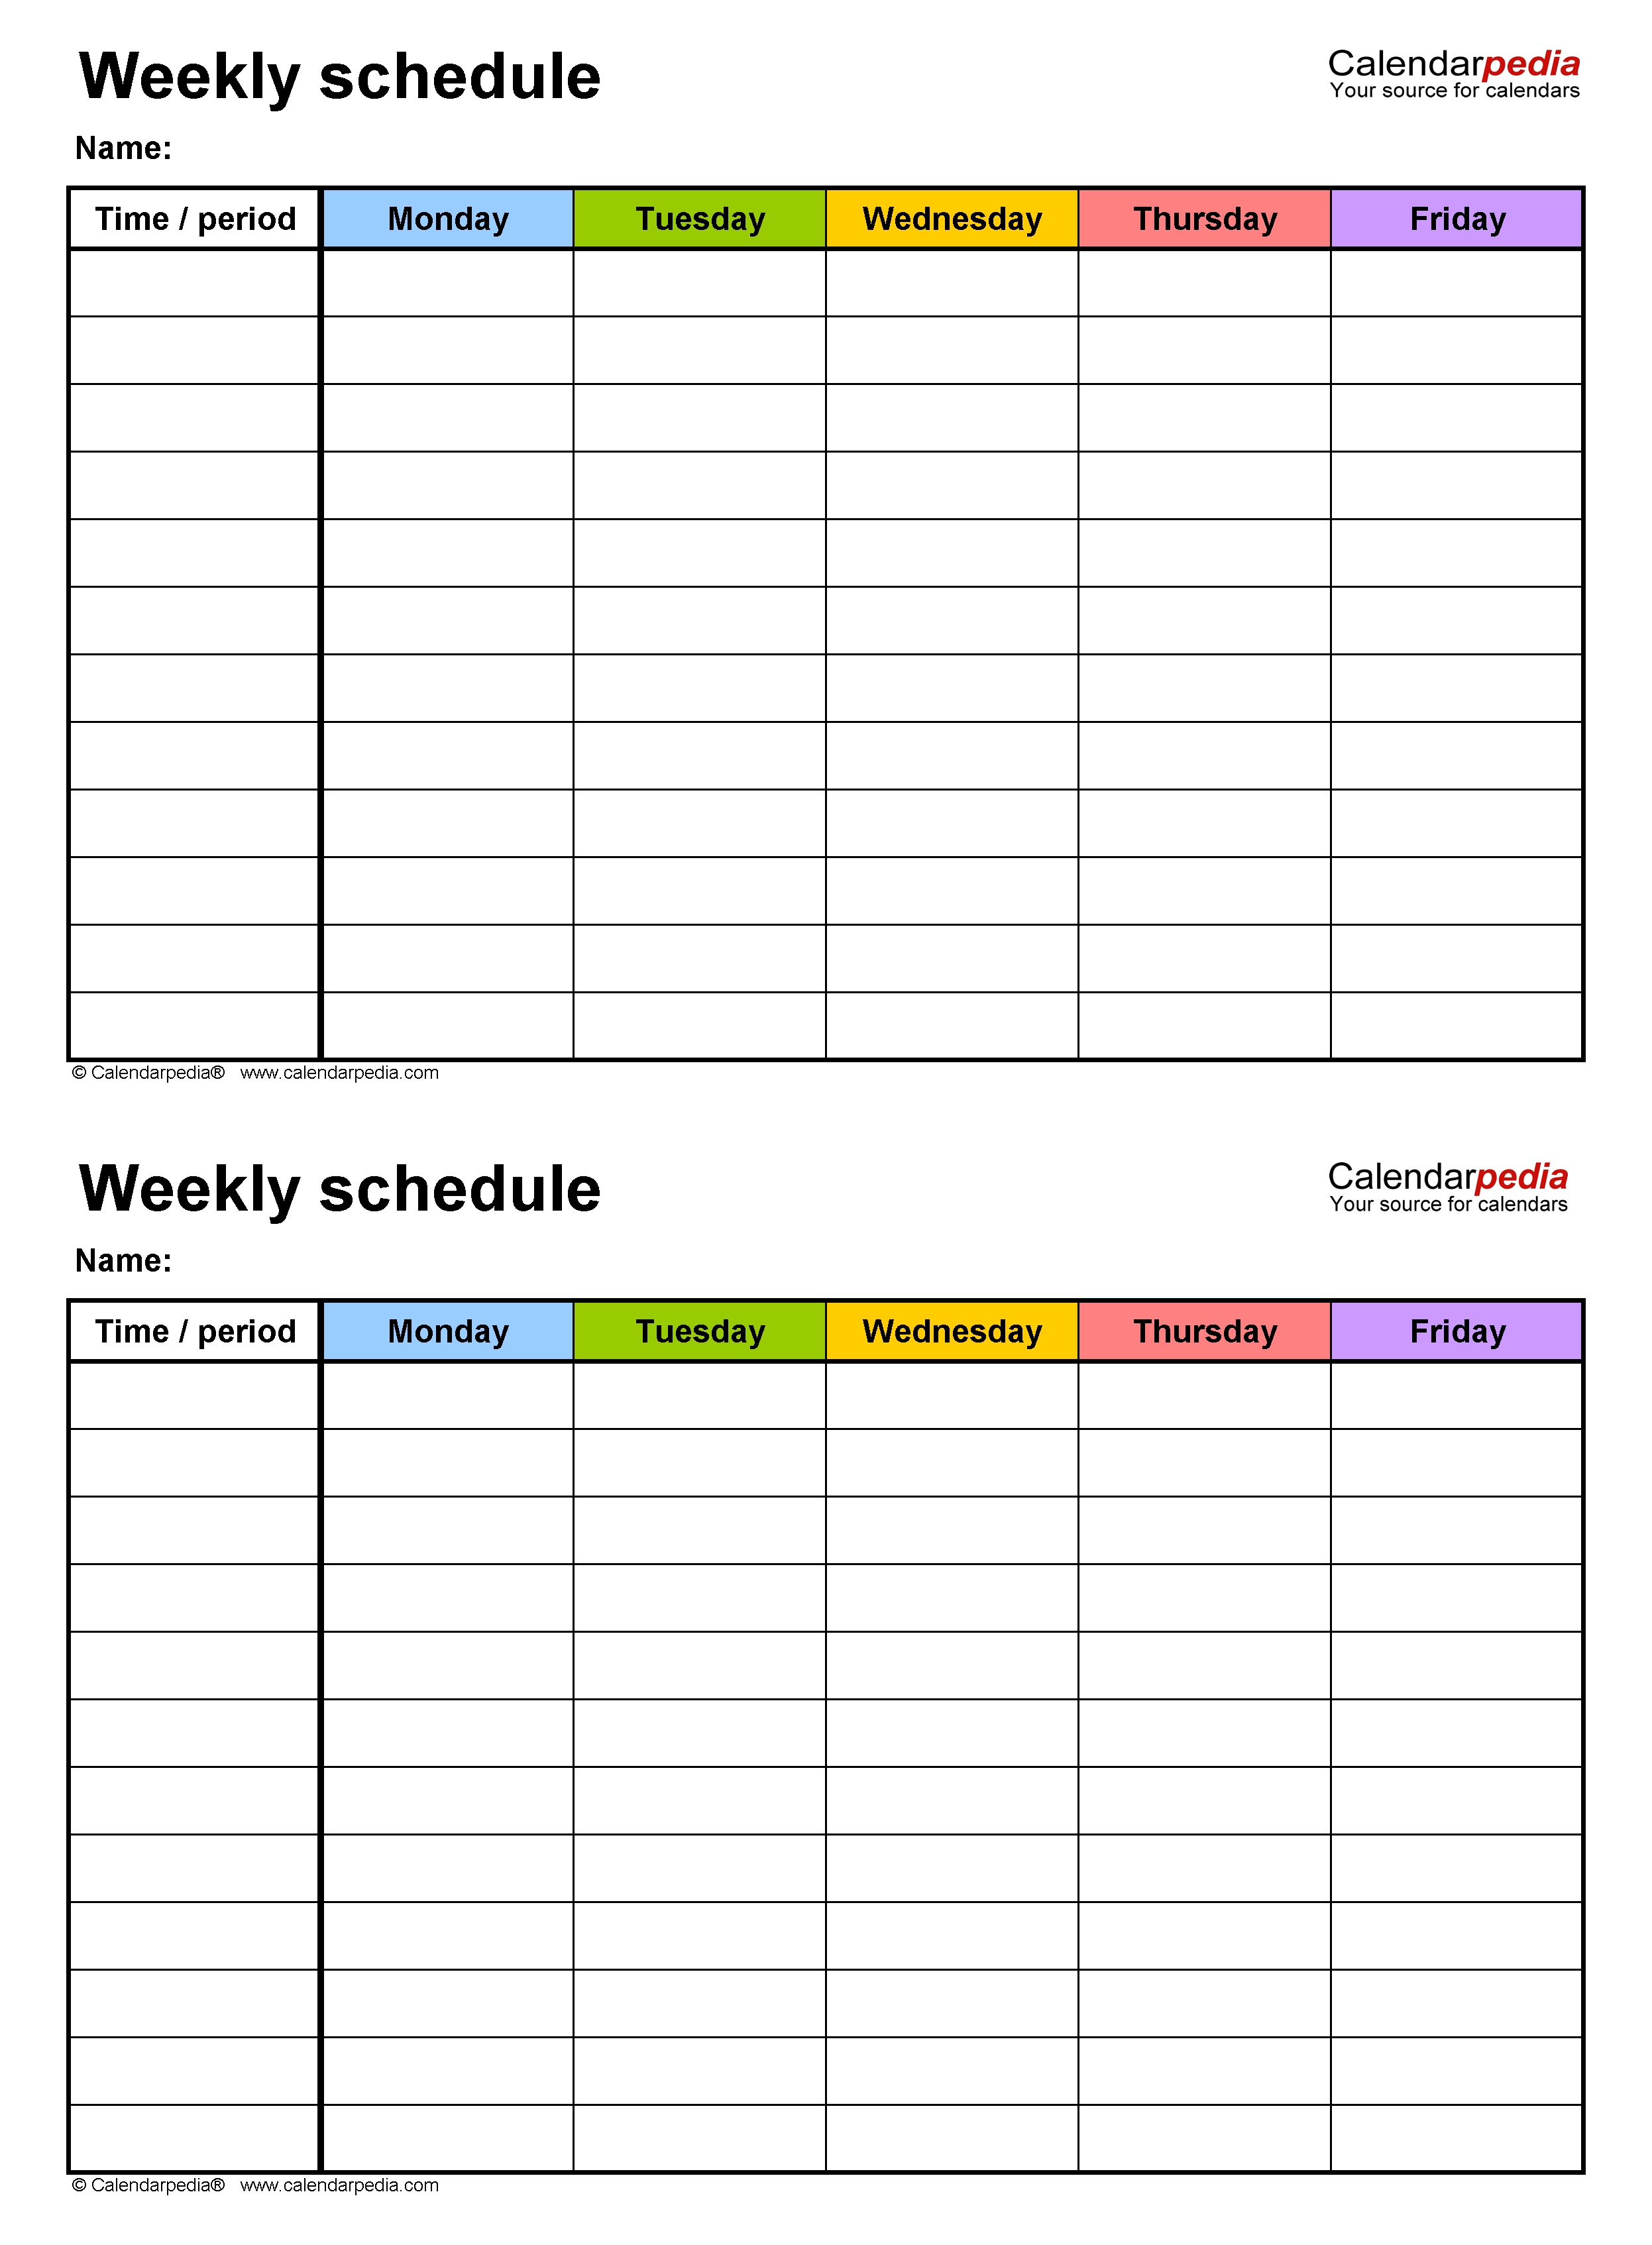 Free Weekly Schedule Templates For Word - 18 Templates  Editable Day Schedule With Time Template